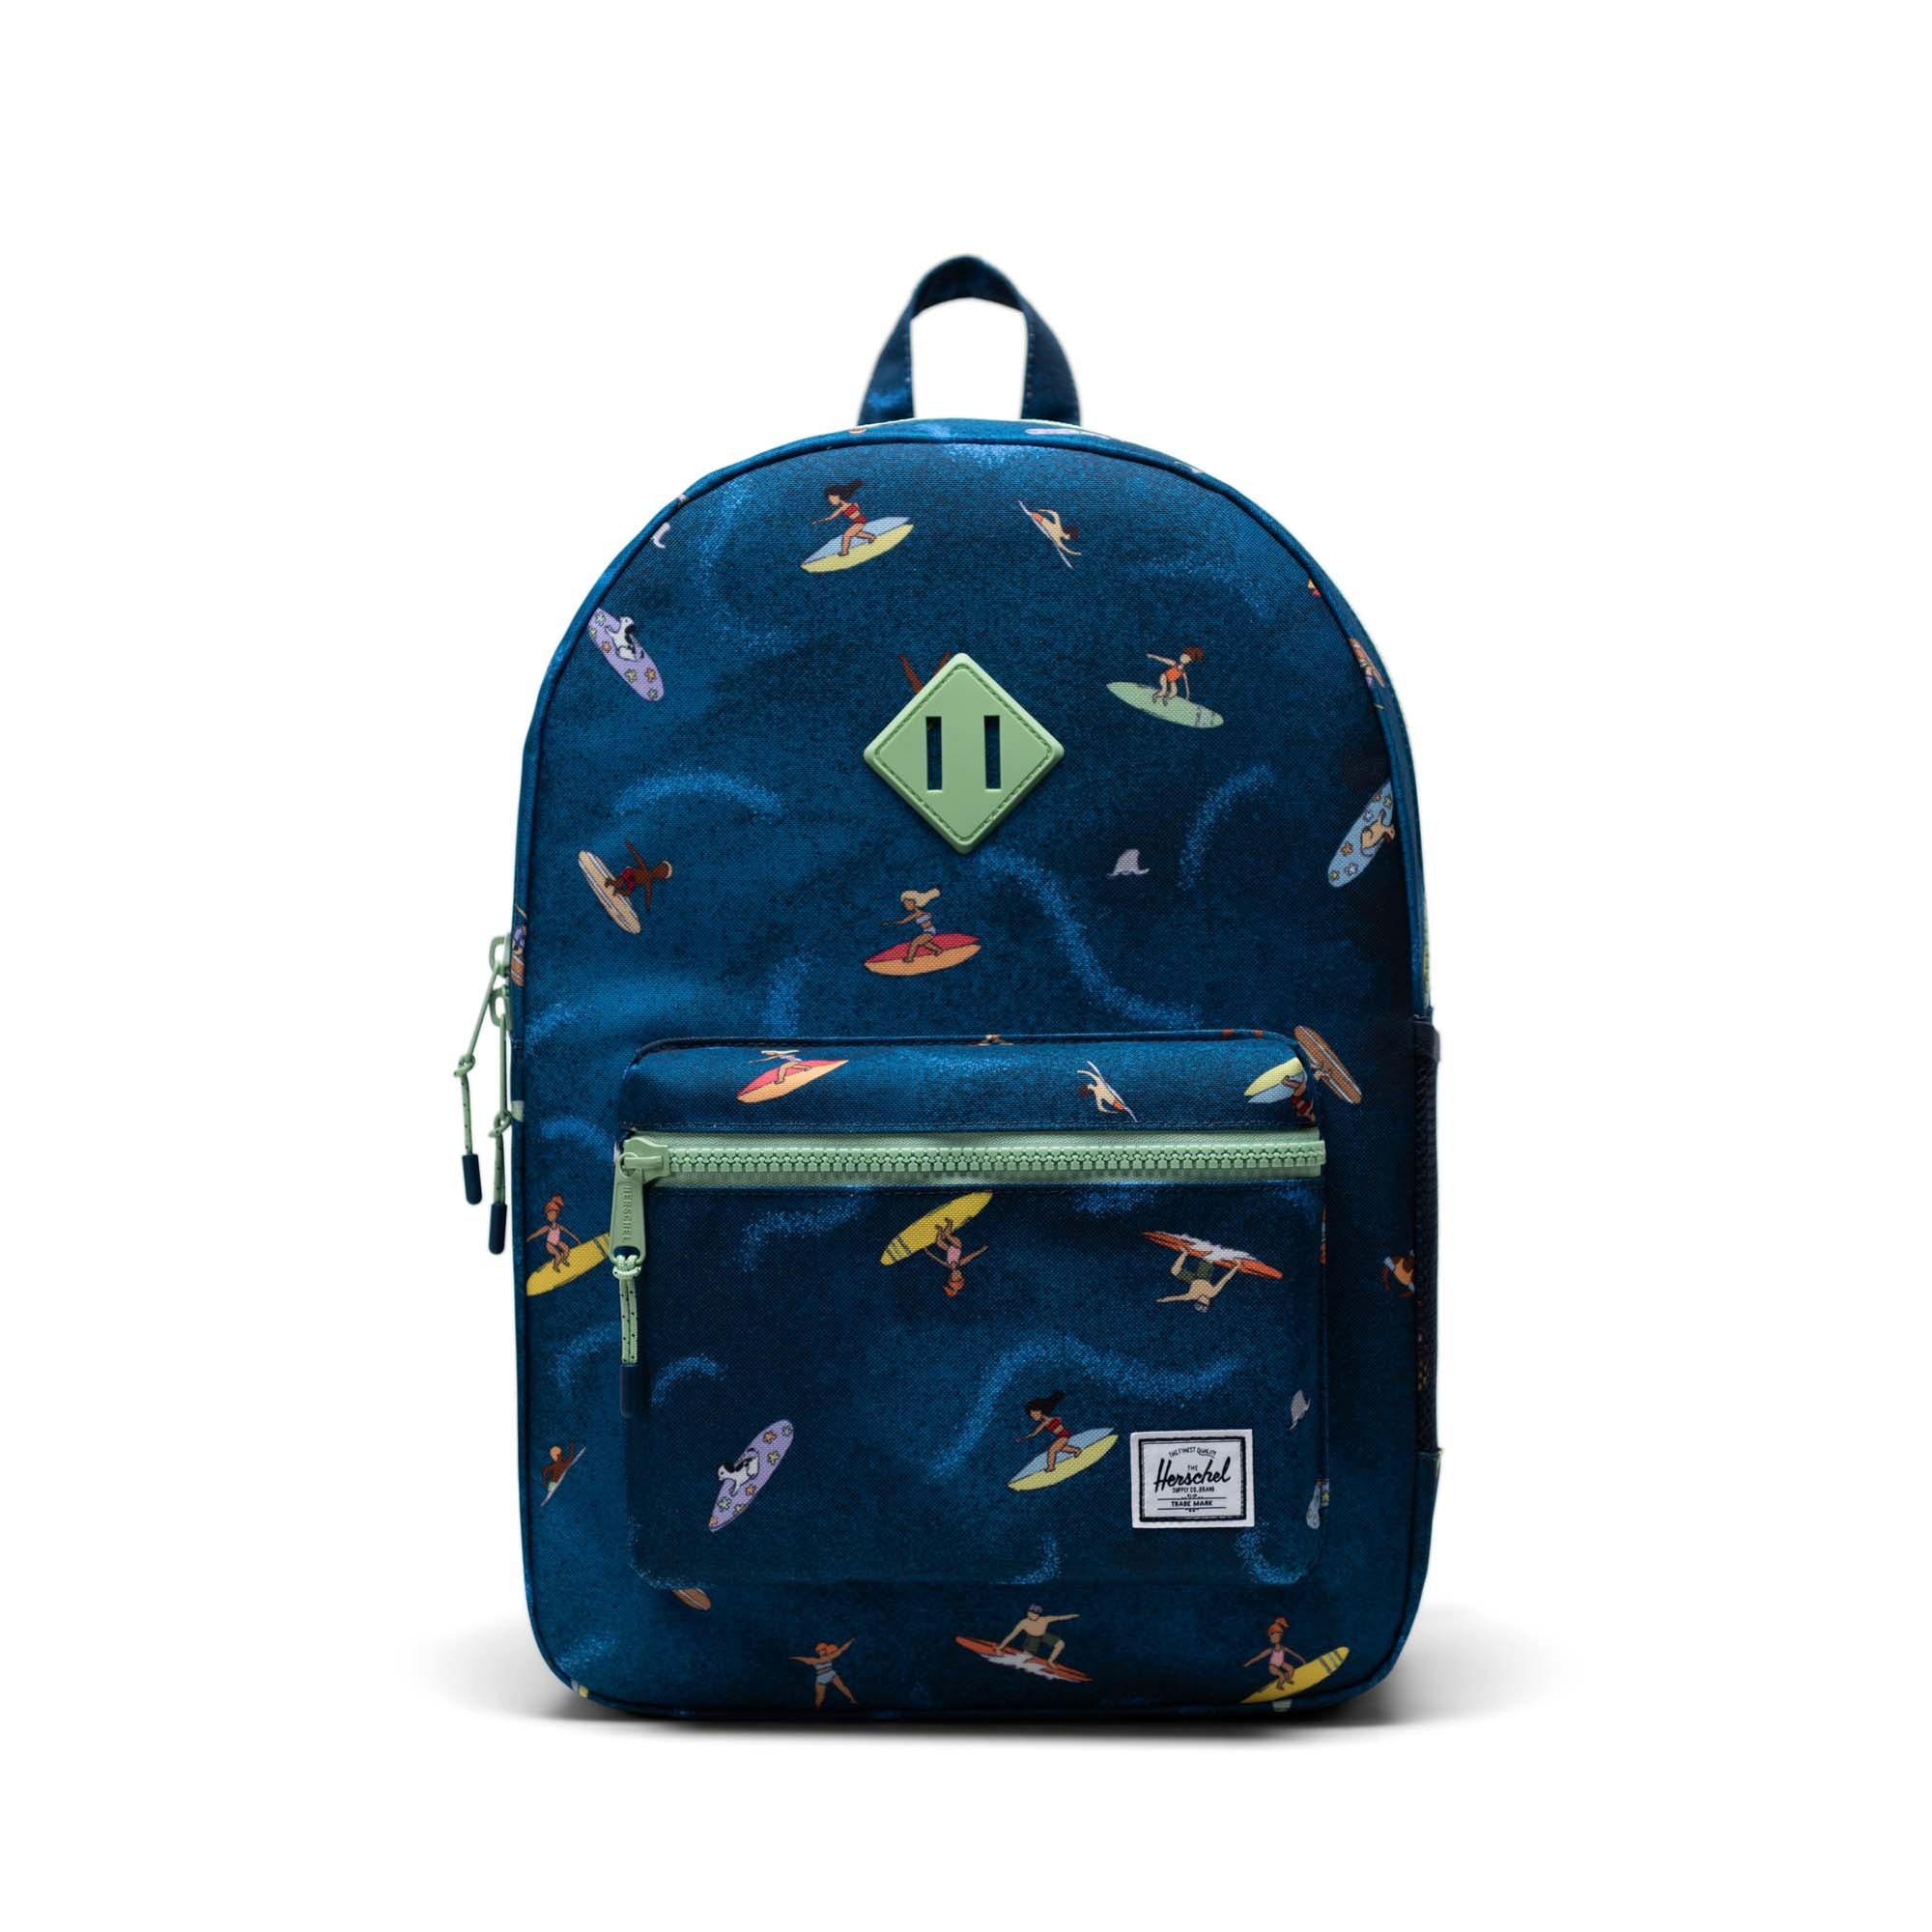 Herschel Supply Co. | Heritage Youth XL (22 ltr) - Surfs Up